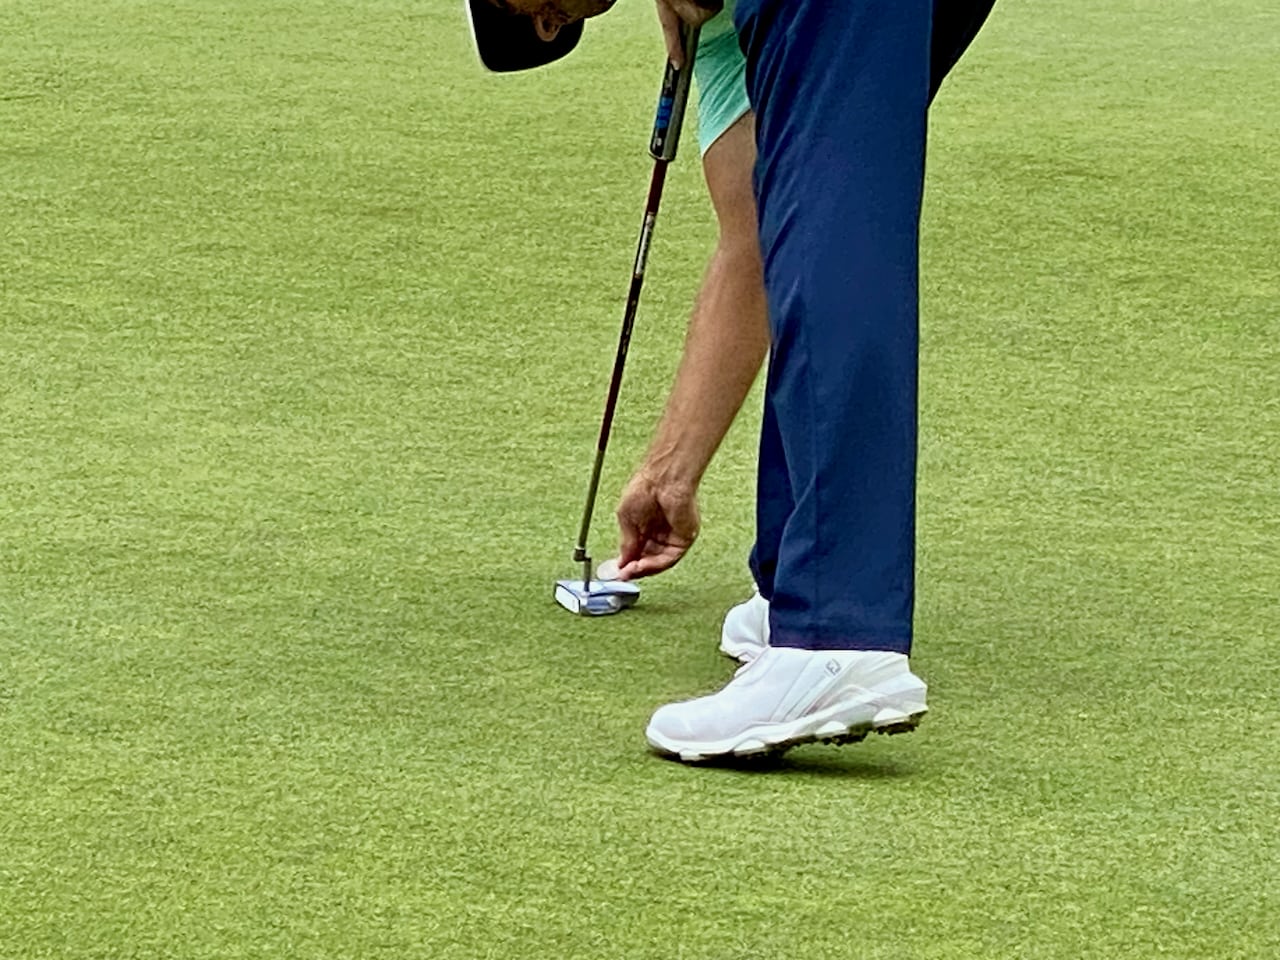 Padraig Harrington marking his ball with Odyssey putter and Foot Joy golf shoes